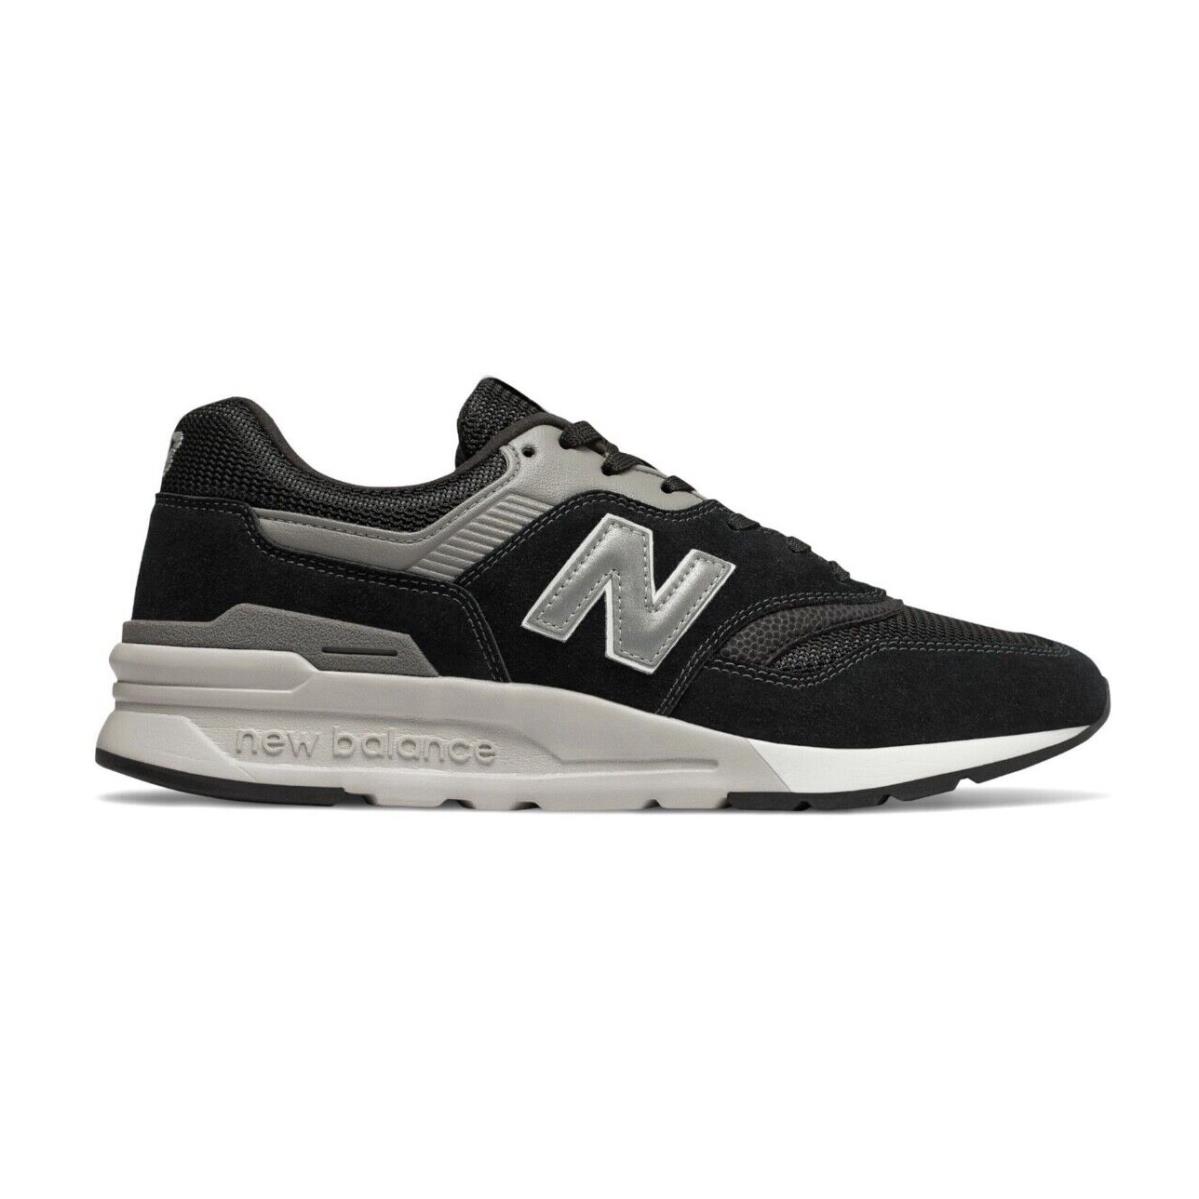 New Balance 997H Cordura Men`s Suede Athletic Running Casual Fashion Shoes Midnight Black/Gray